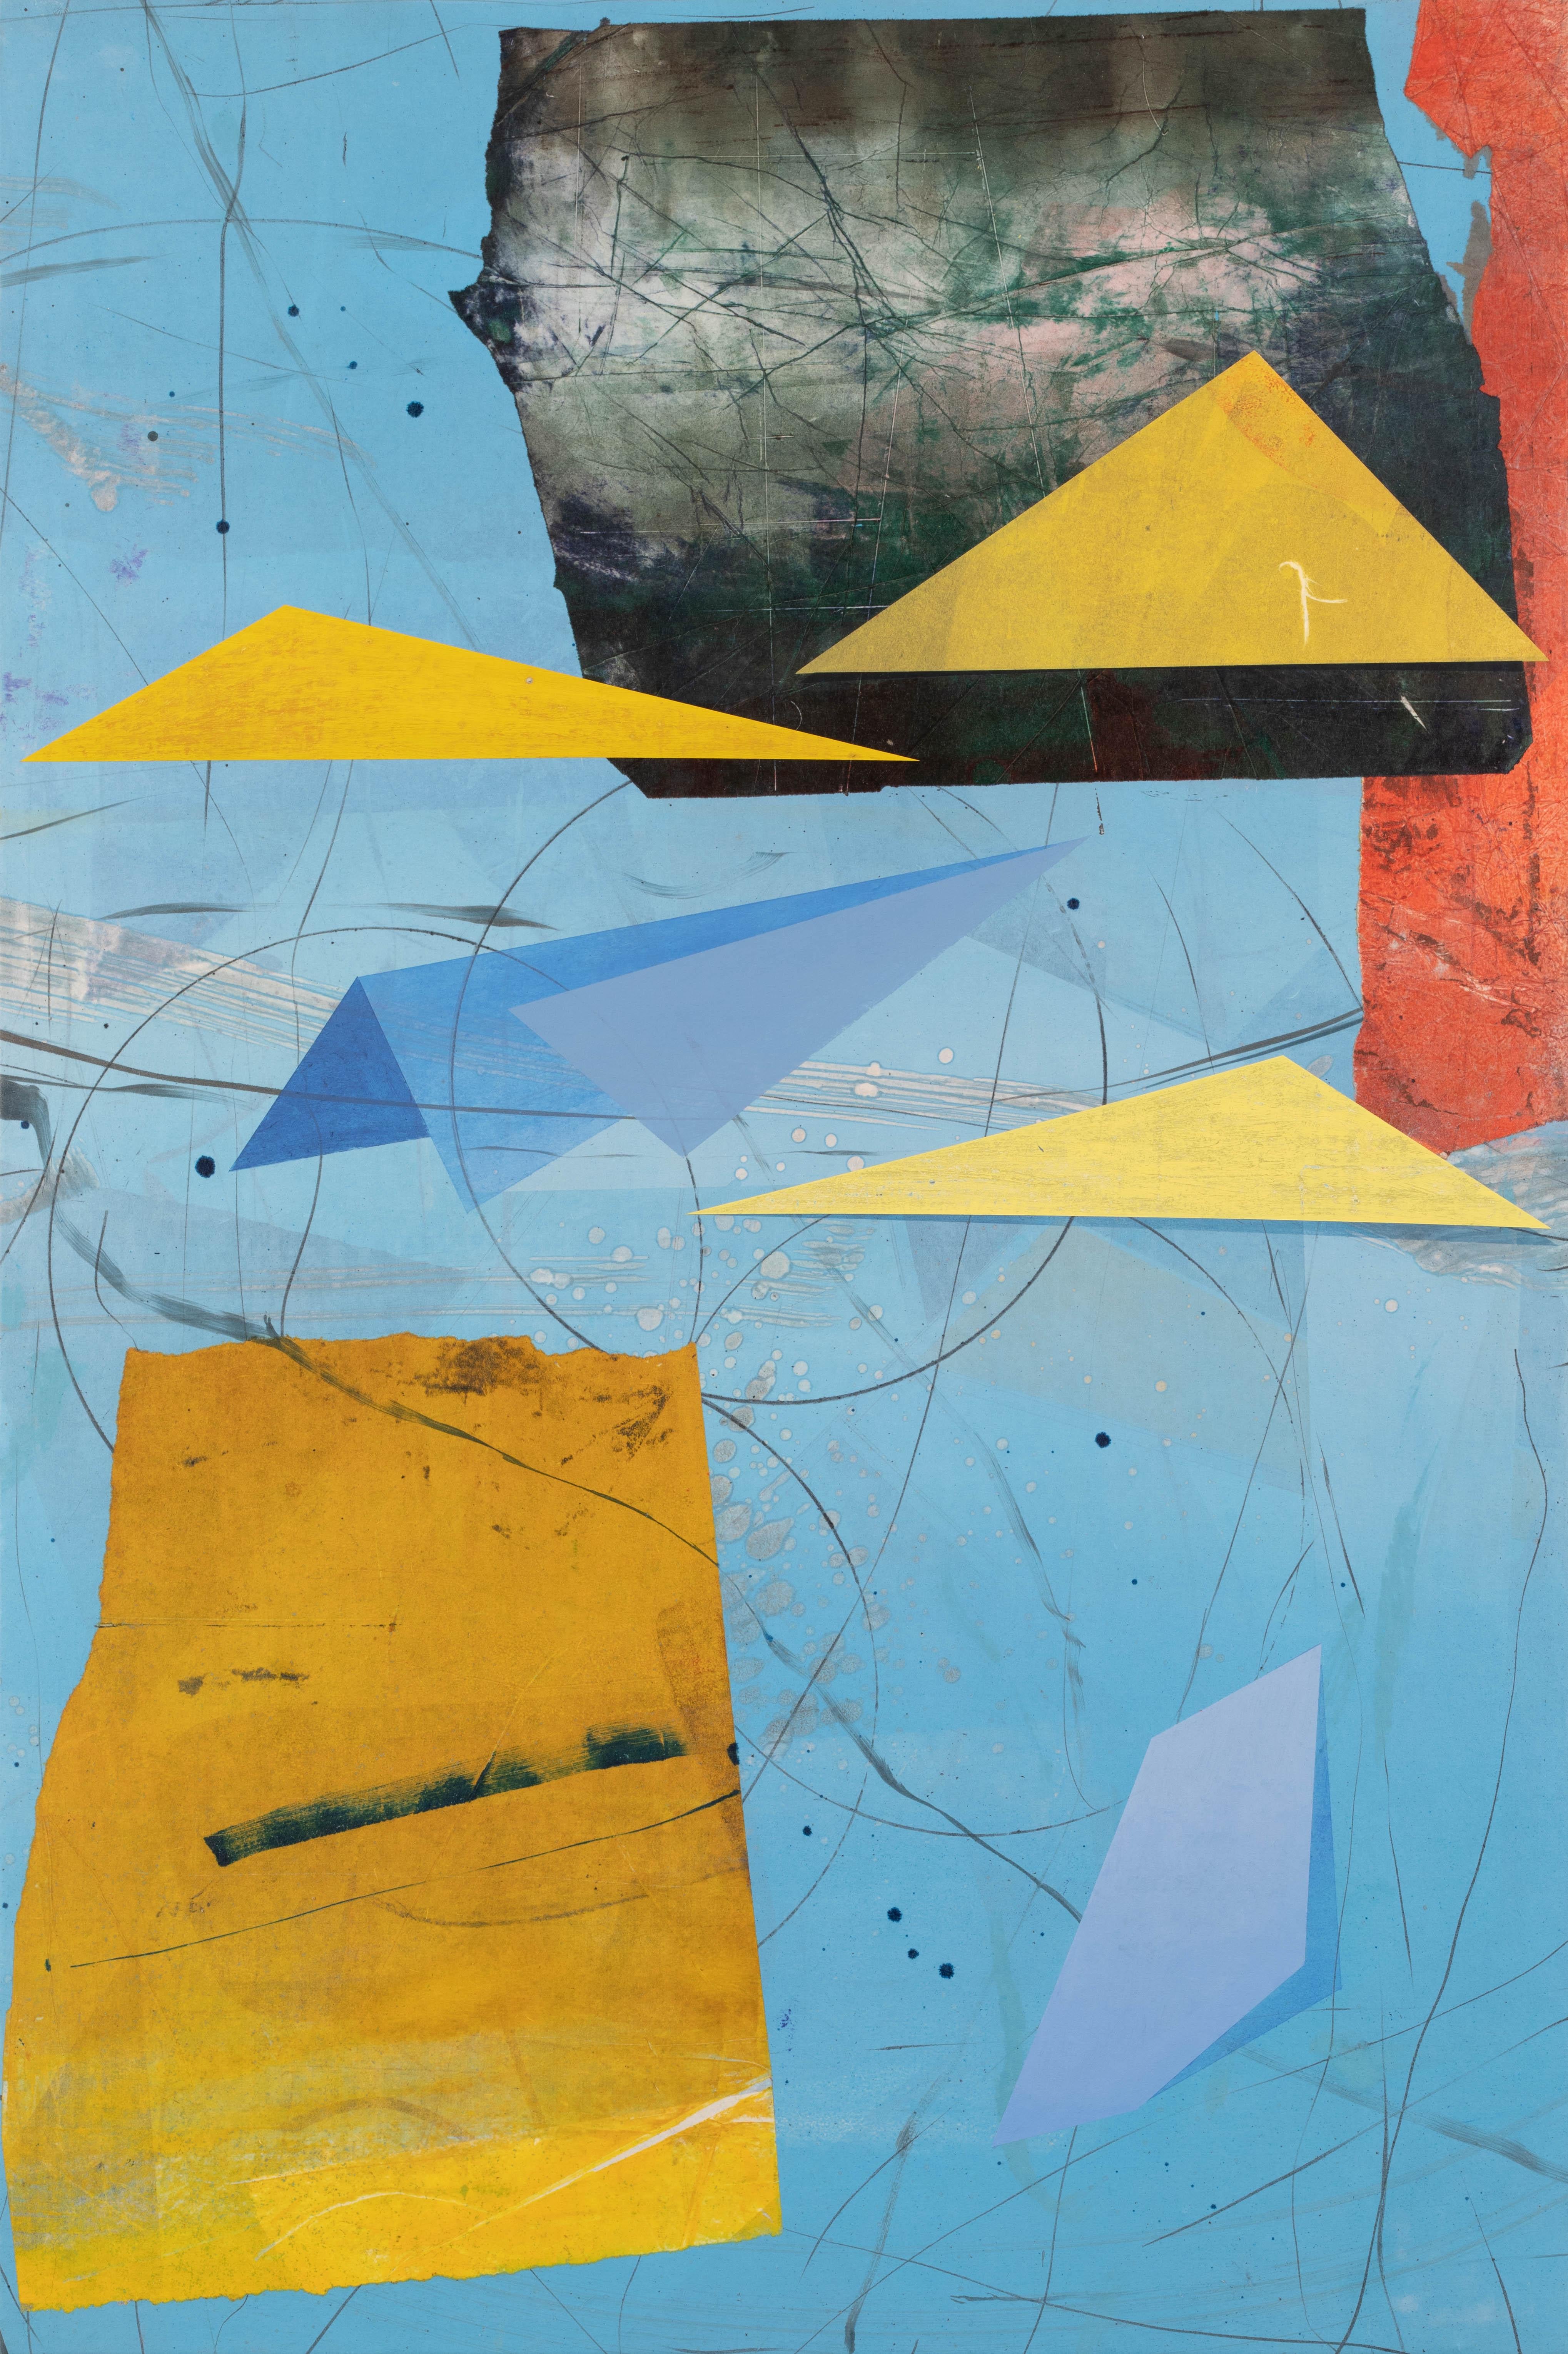 Abstract Painting David Collins - The Visitors, Sky Blue, Yellow, Black, Red Formes géométriques abstraites, Triangles